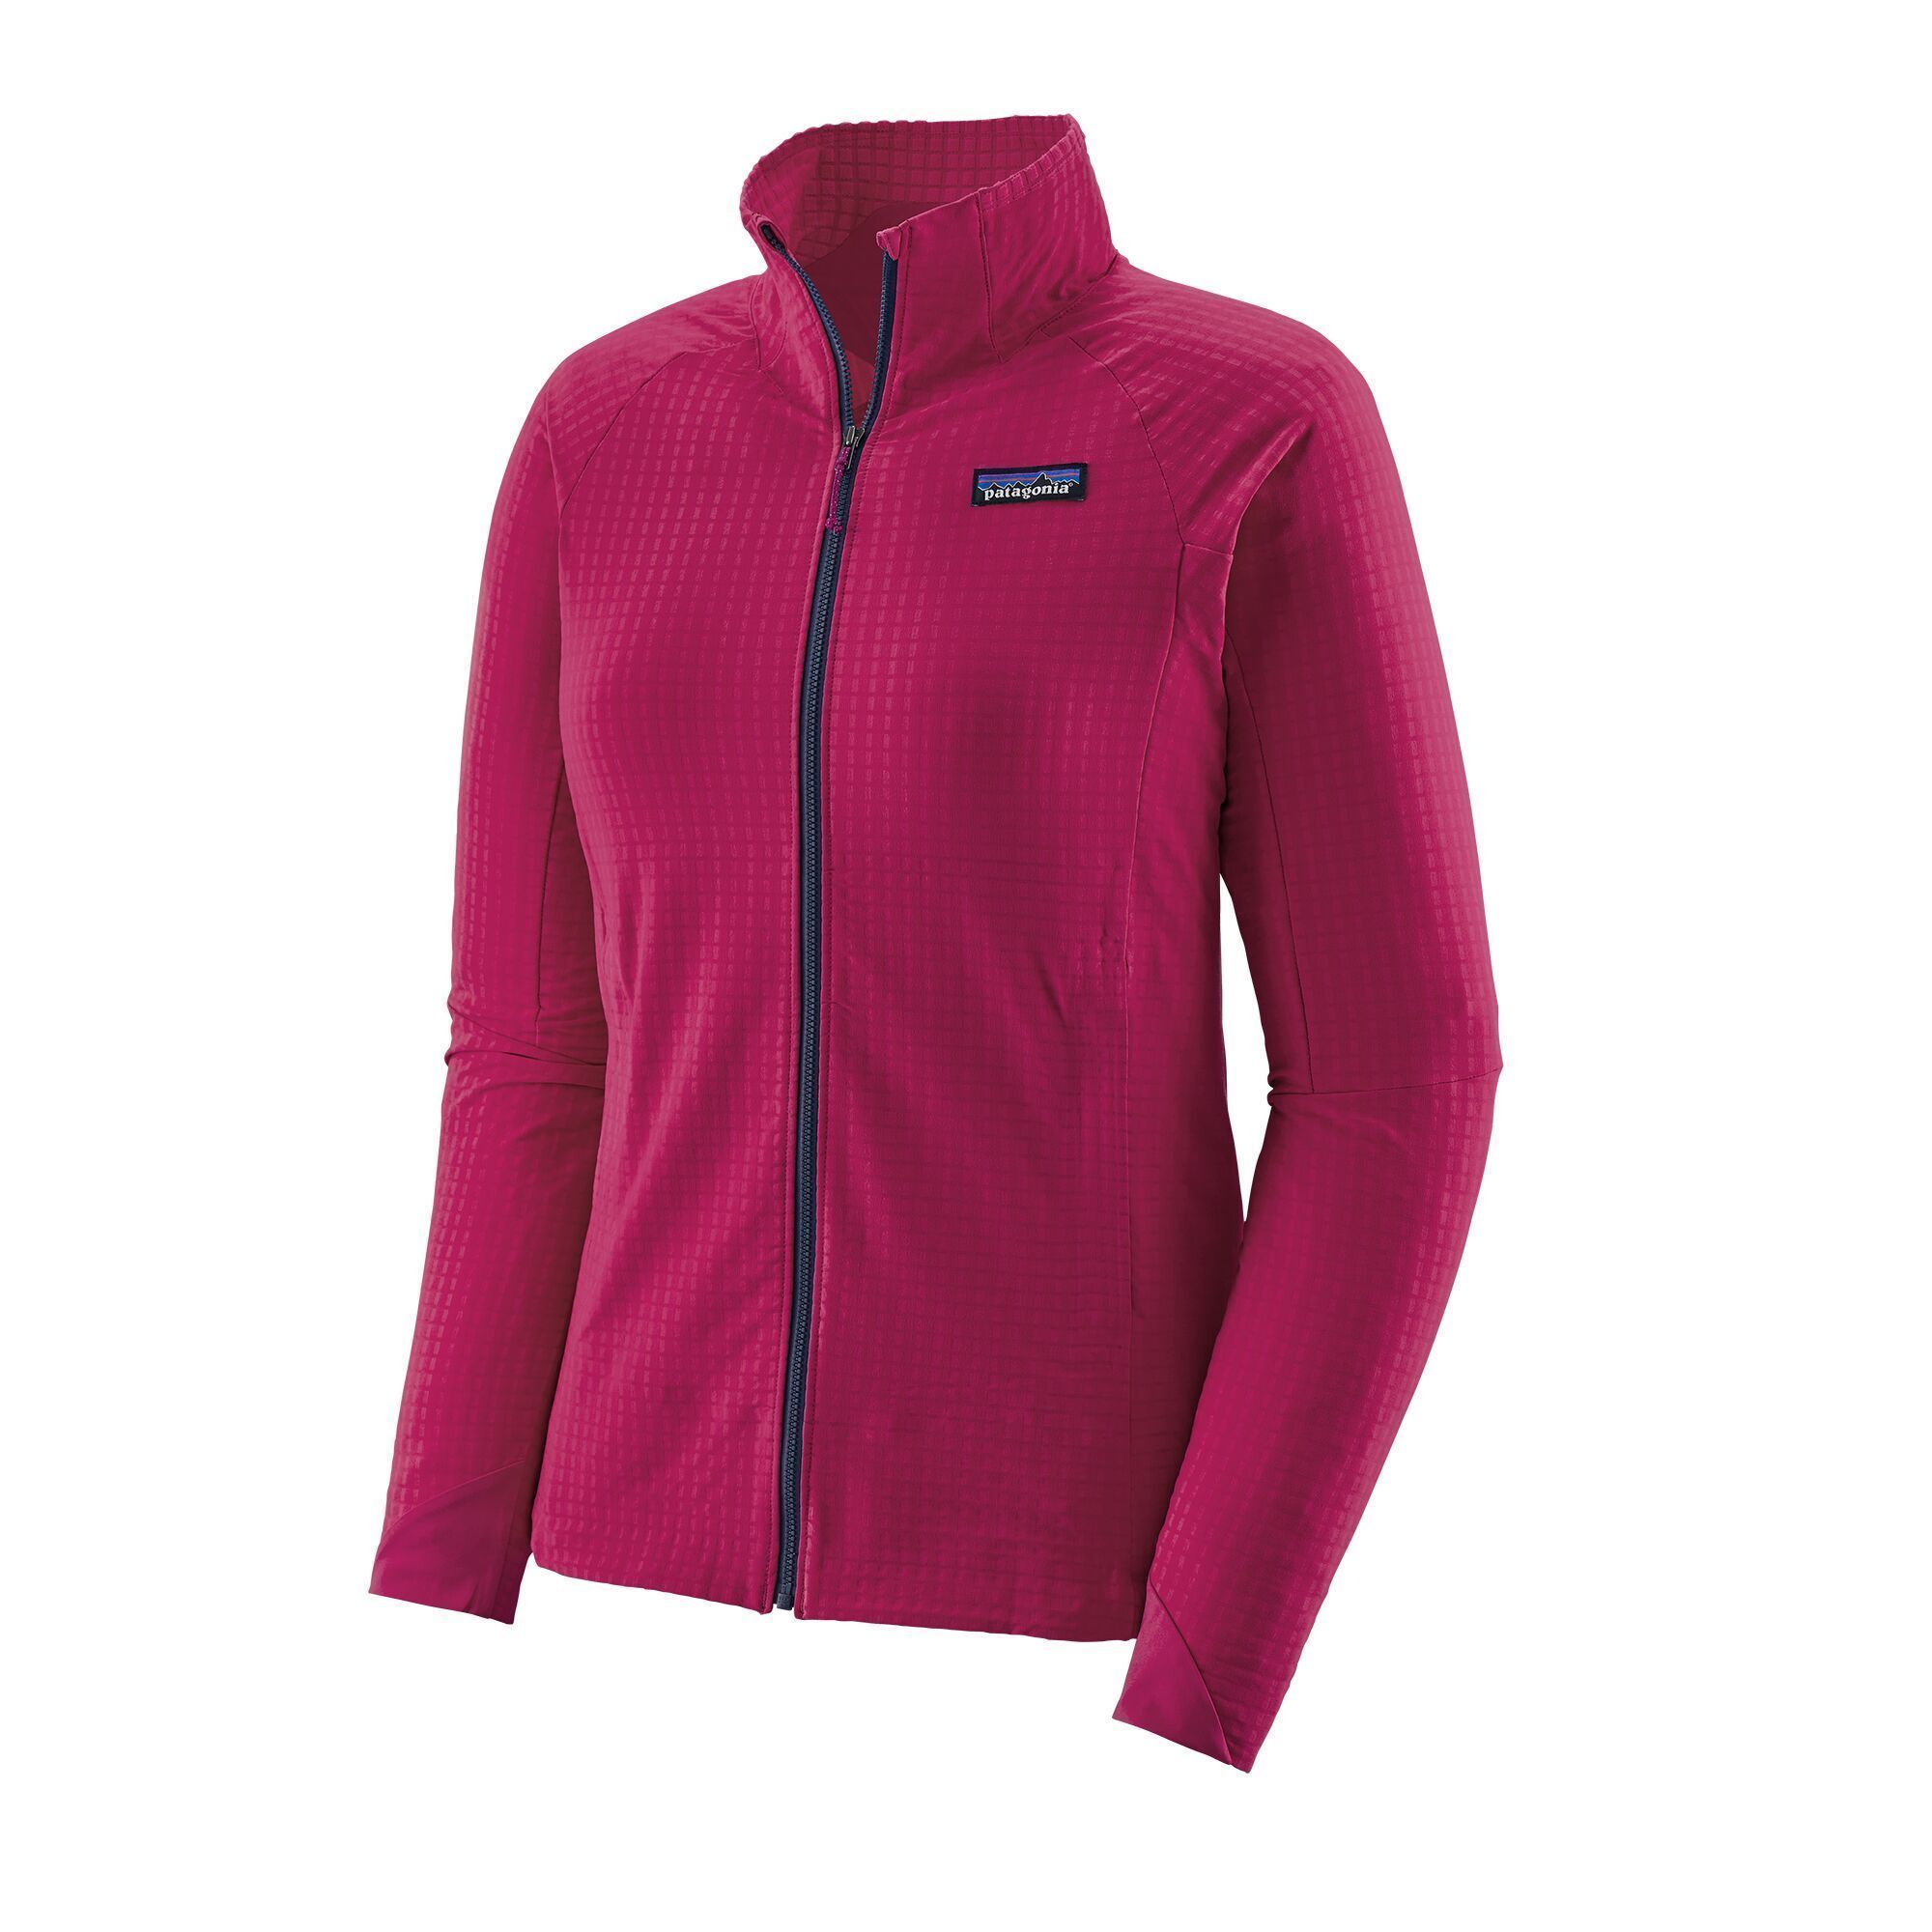 Patagonia Women's R1® TechFace Jacket - Recycled Polyester, Craft Pink / XS